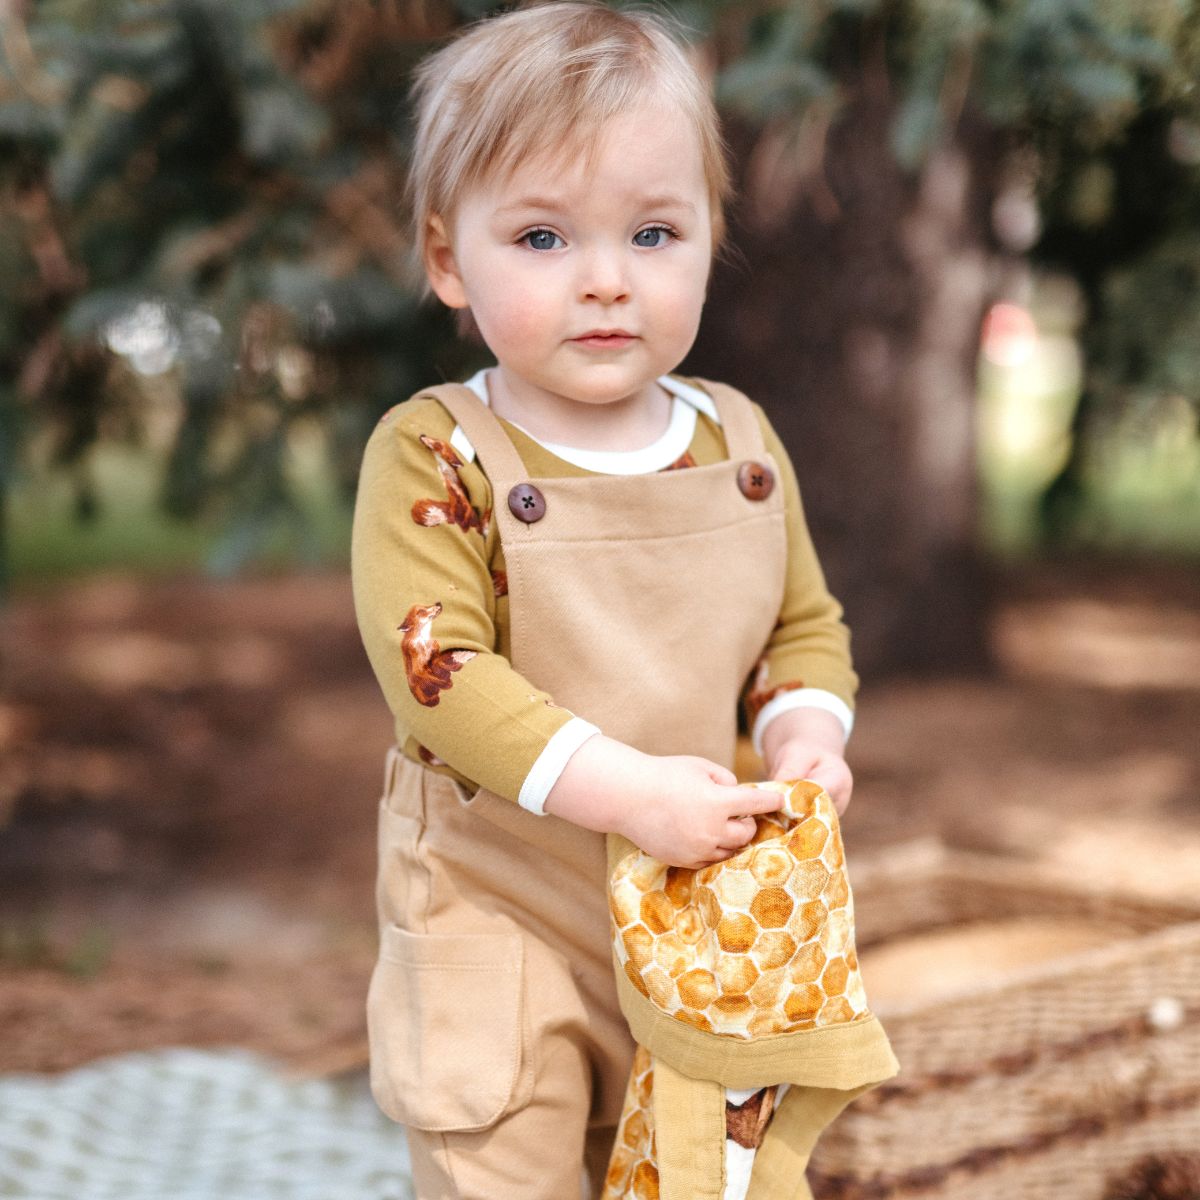 Carhartt Kids: Hats, Dungarees, Trousers - Babies & Toddlers